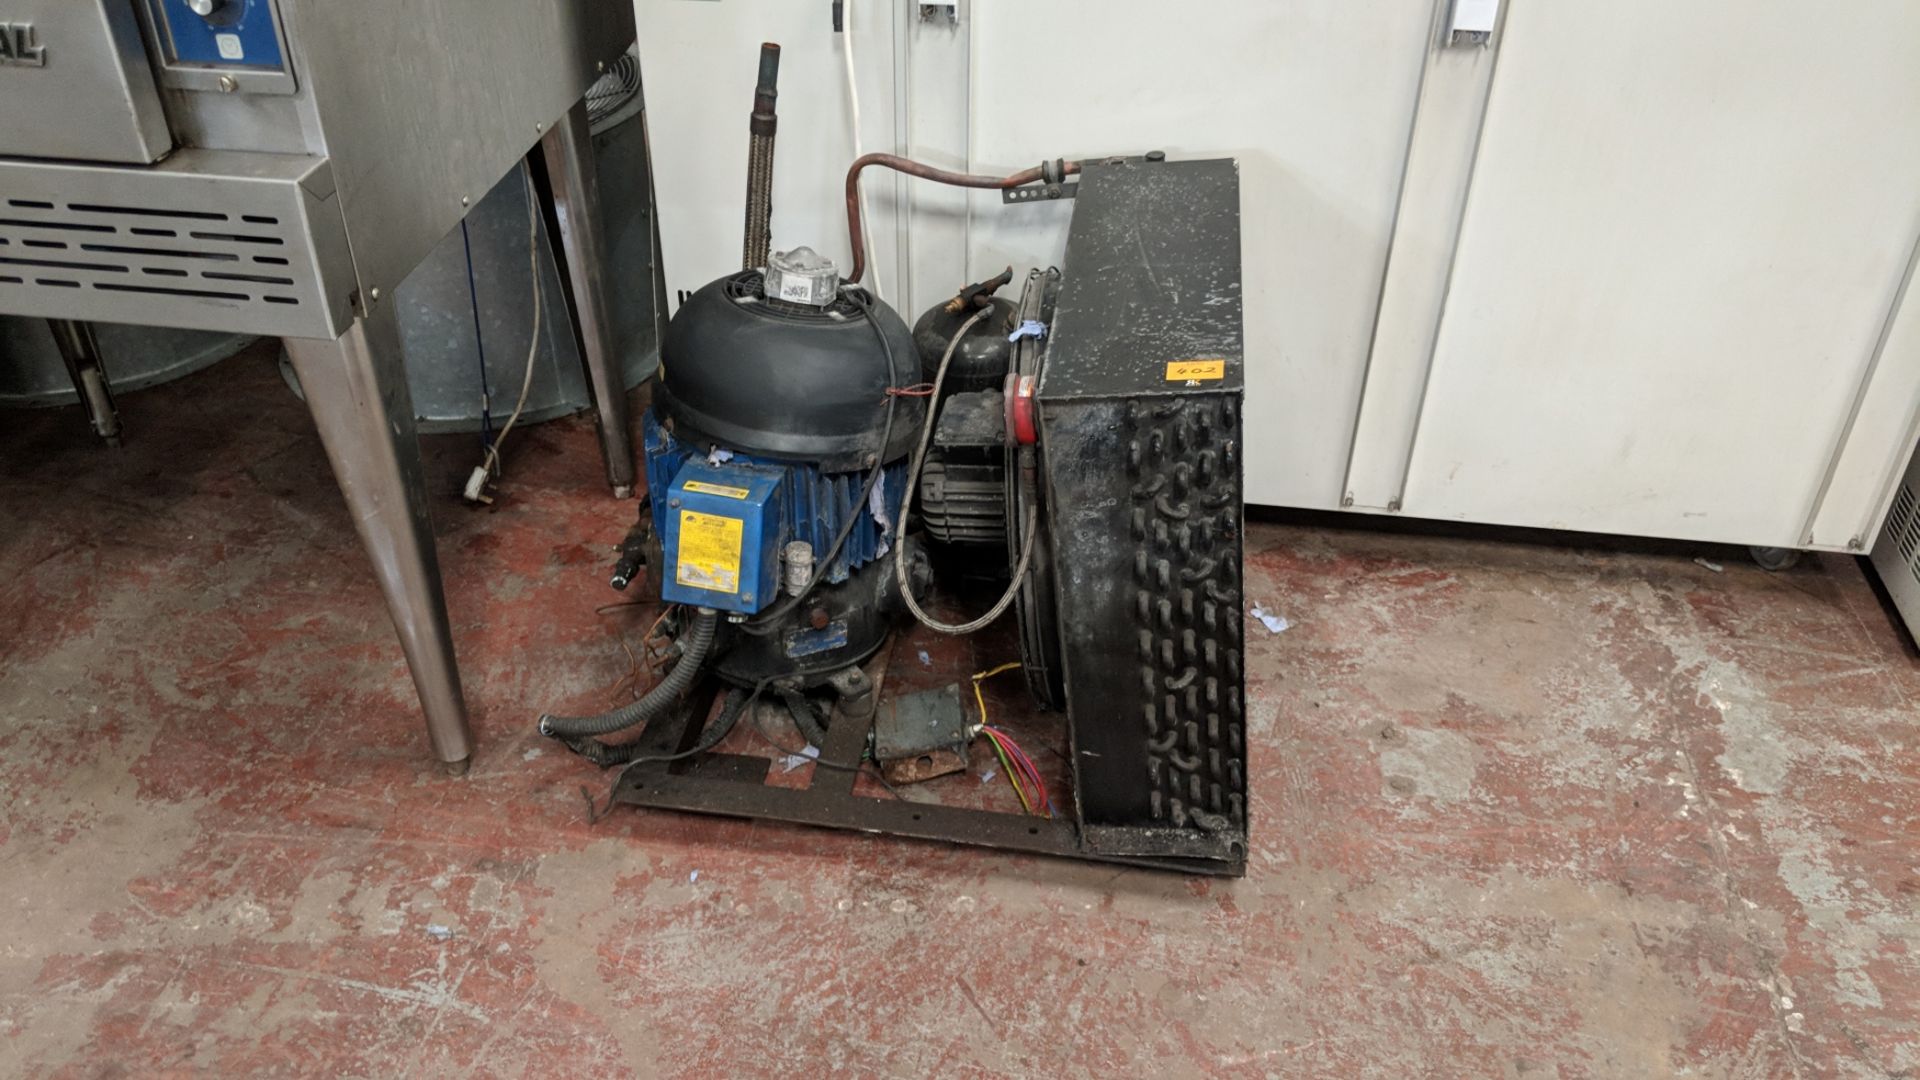 Compressor unit IMPORTANT: Please remember goods successfully bid upon must be paid for and